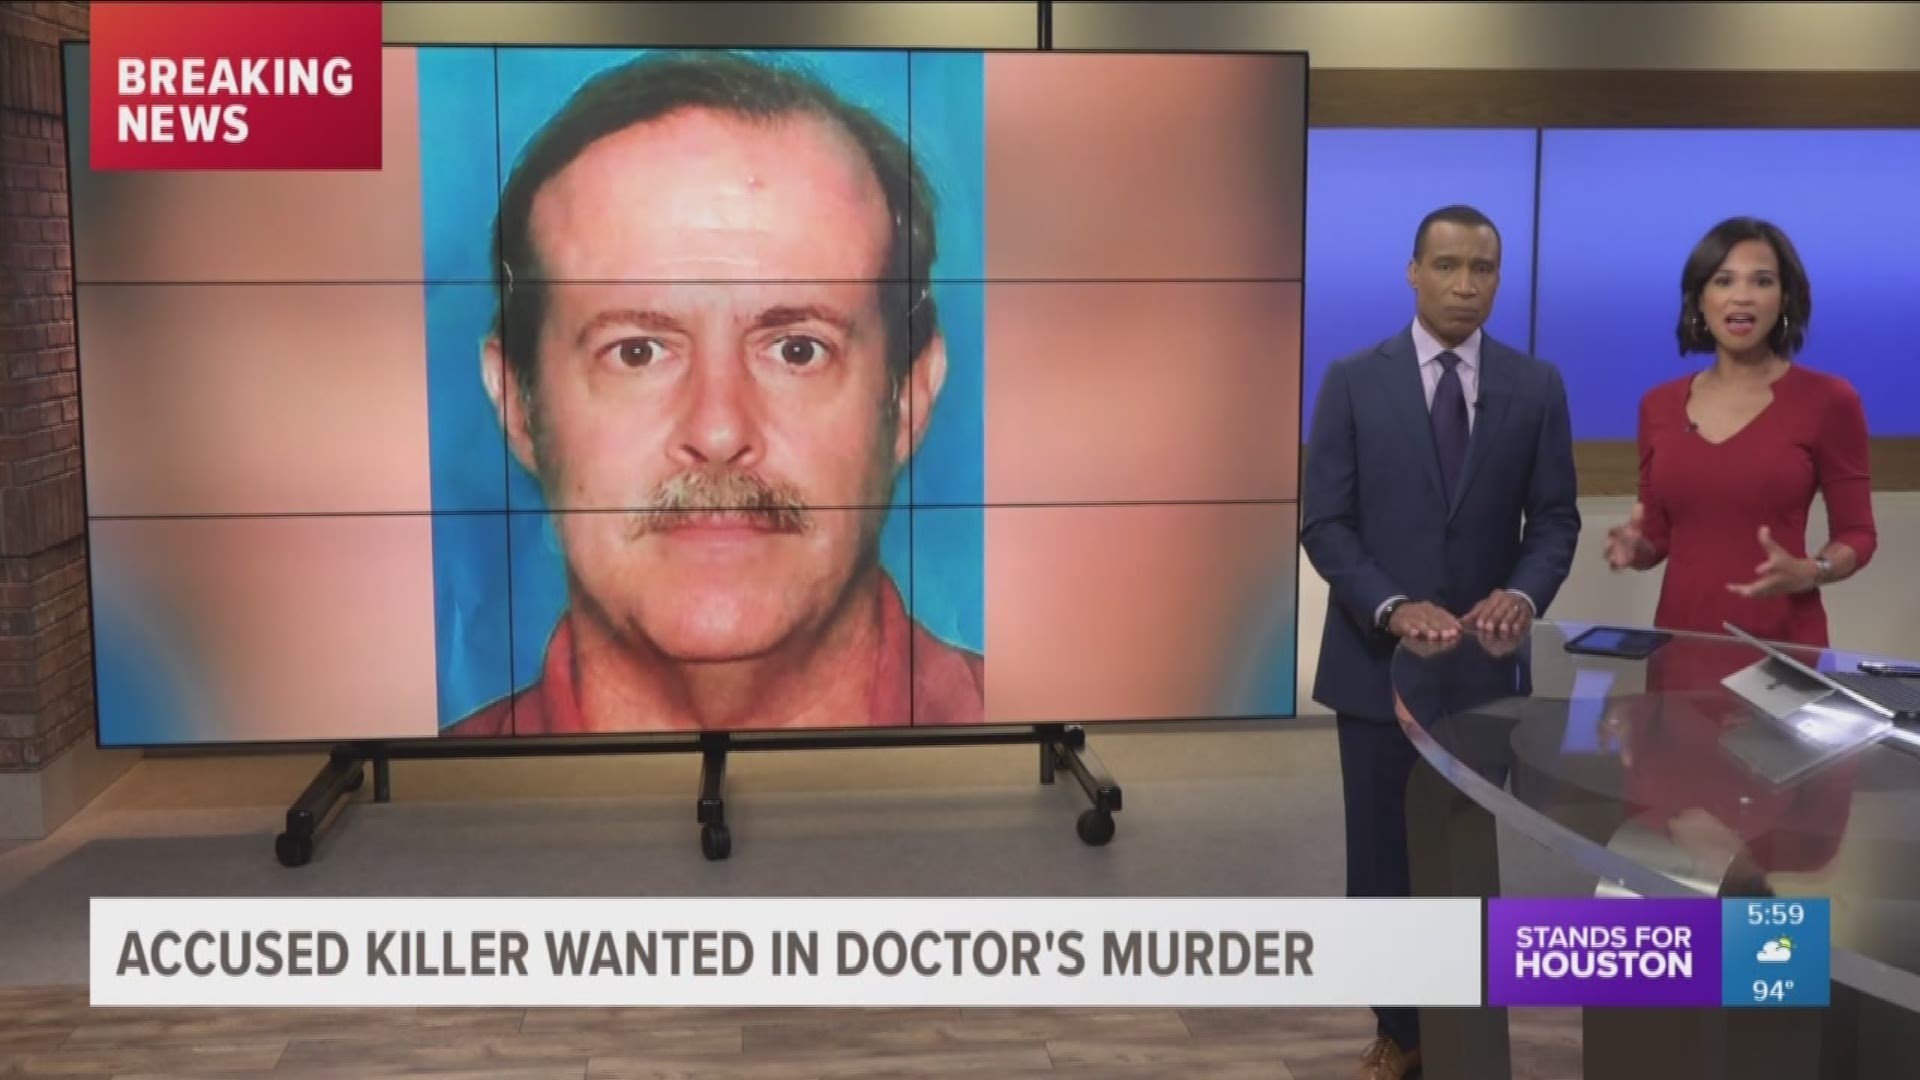 Suspect named in doctor's murder
Houston officials say possible child detention center does NOT have proper permits
How long will the lower humidity stick around?